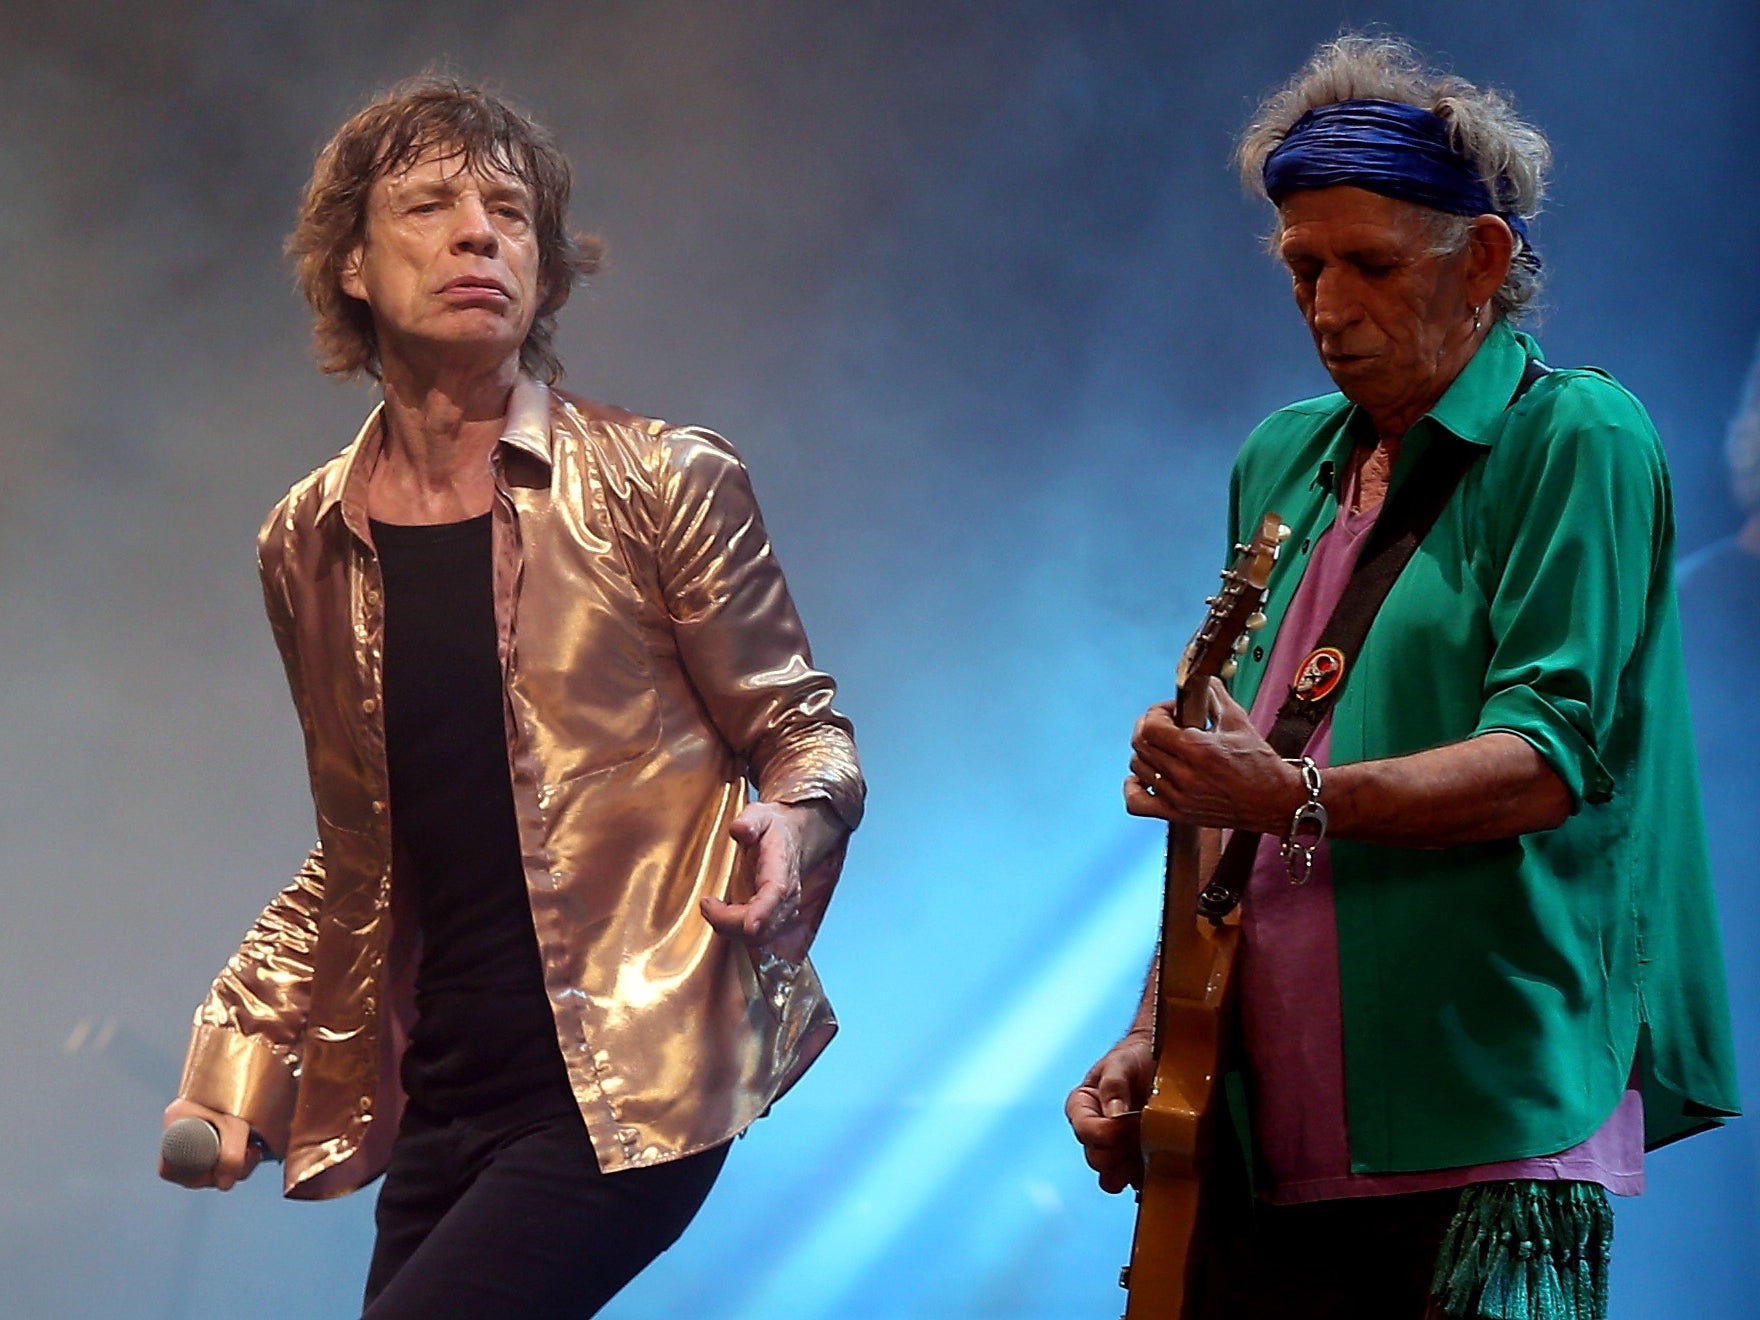 The Rolling Stones perform at Glastonbury in 2013